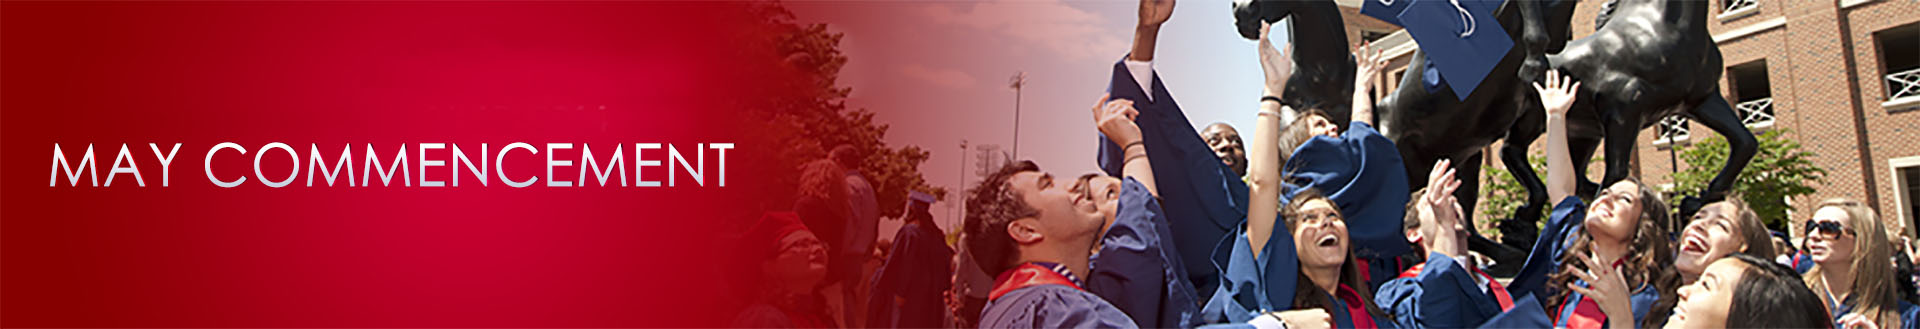 May Commencement Convocation - SMU